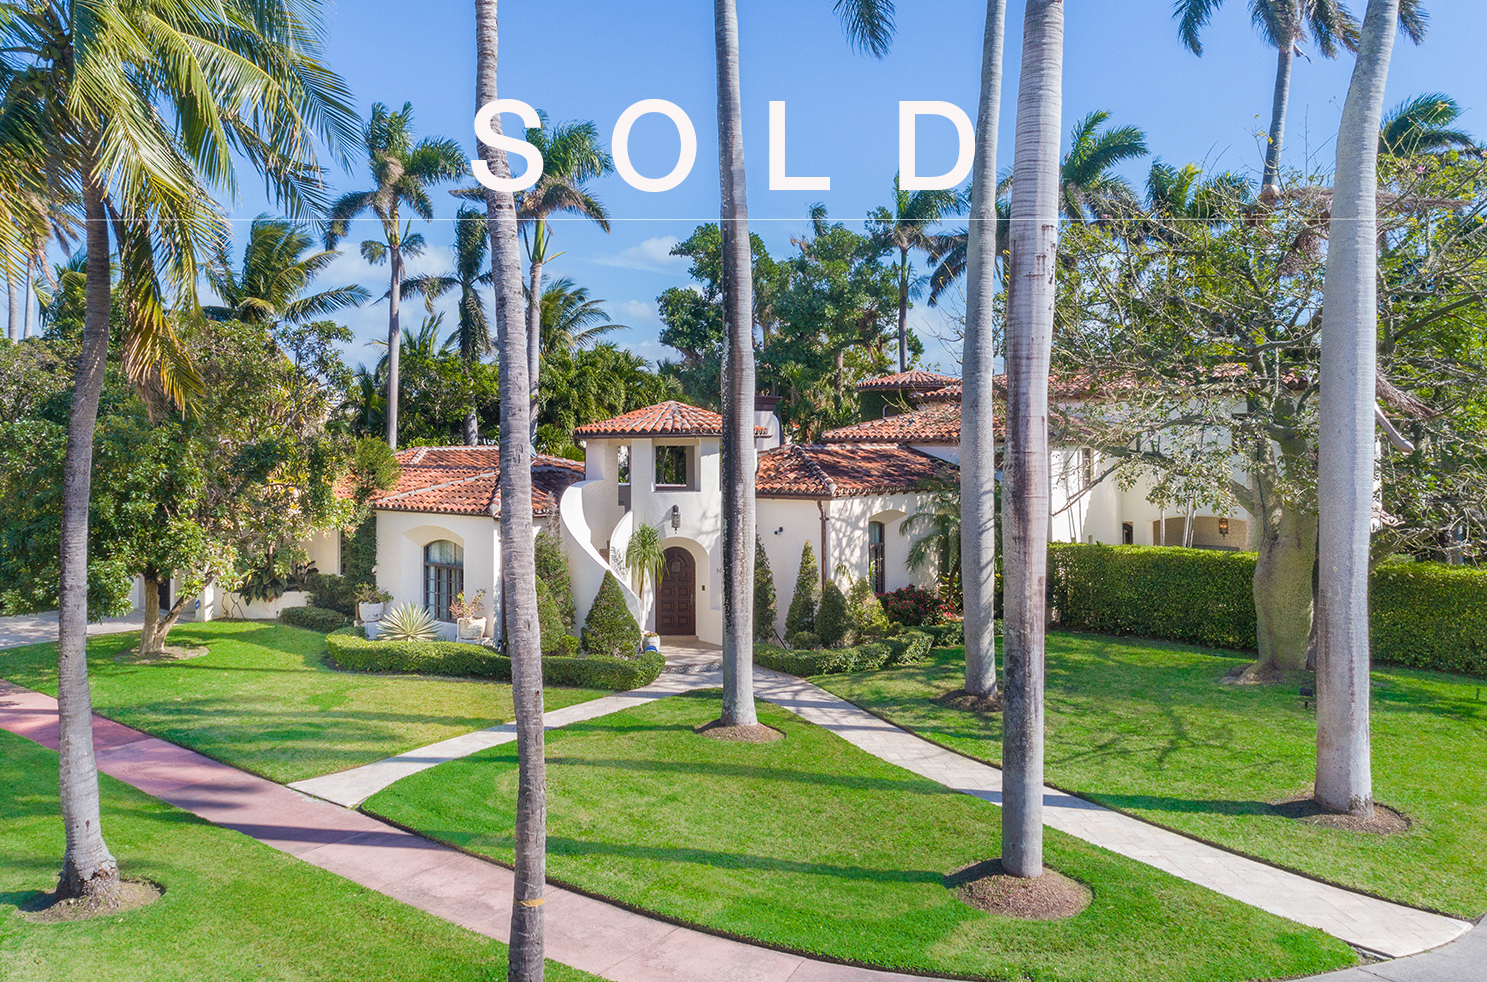 Record-Breaking Sale for Non-waterfront home on North Bay Road by Top Producer Nelson Gonzalez